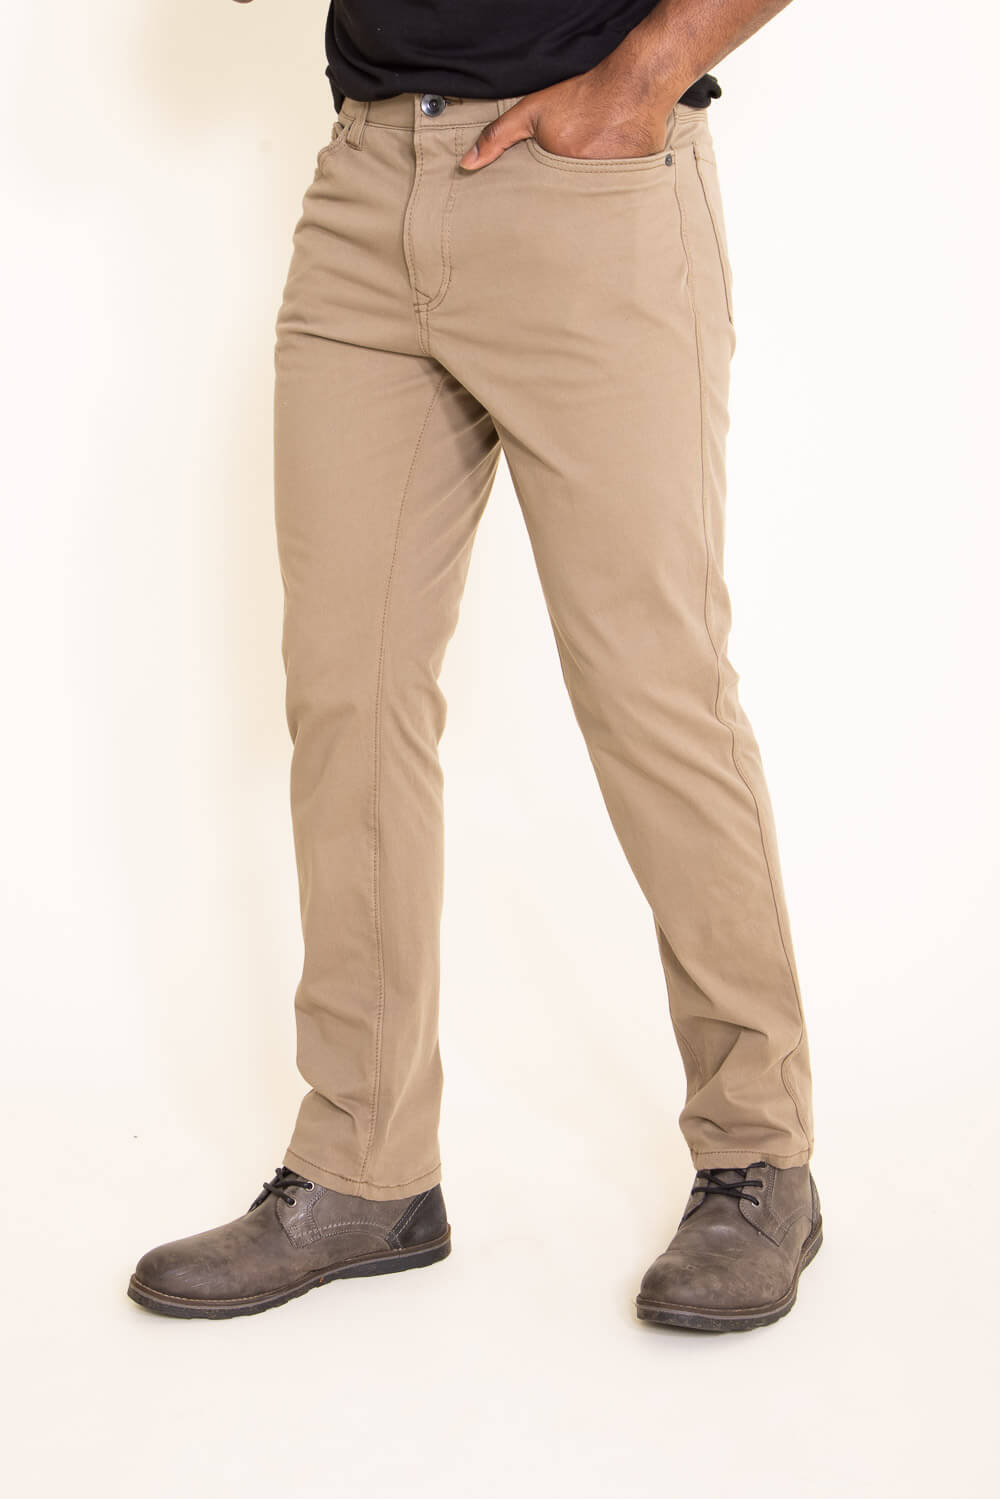 mens twill pant | Nordstrom